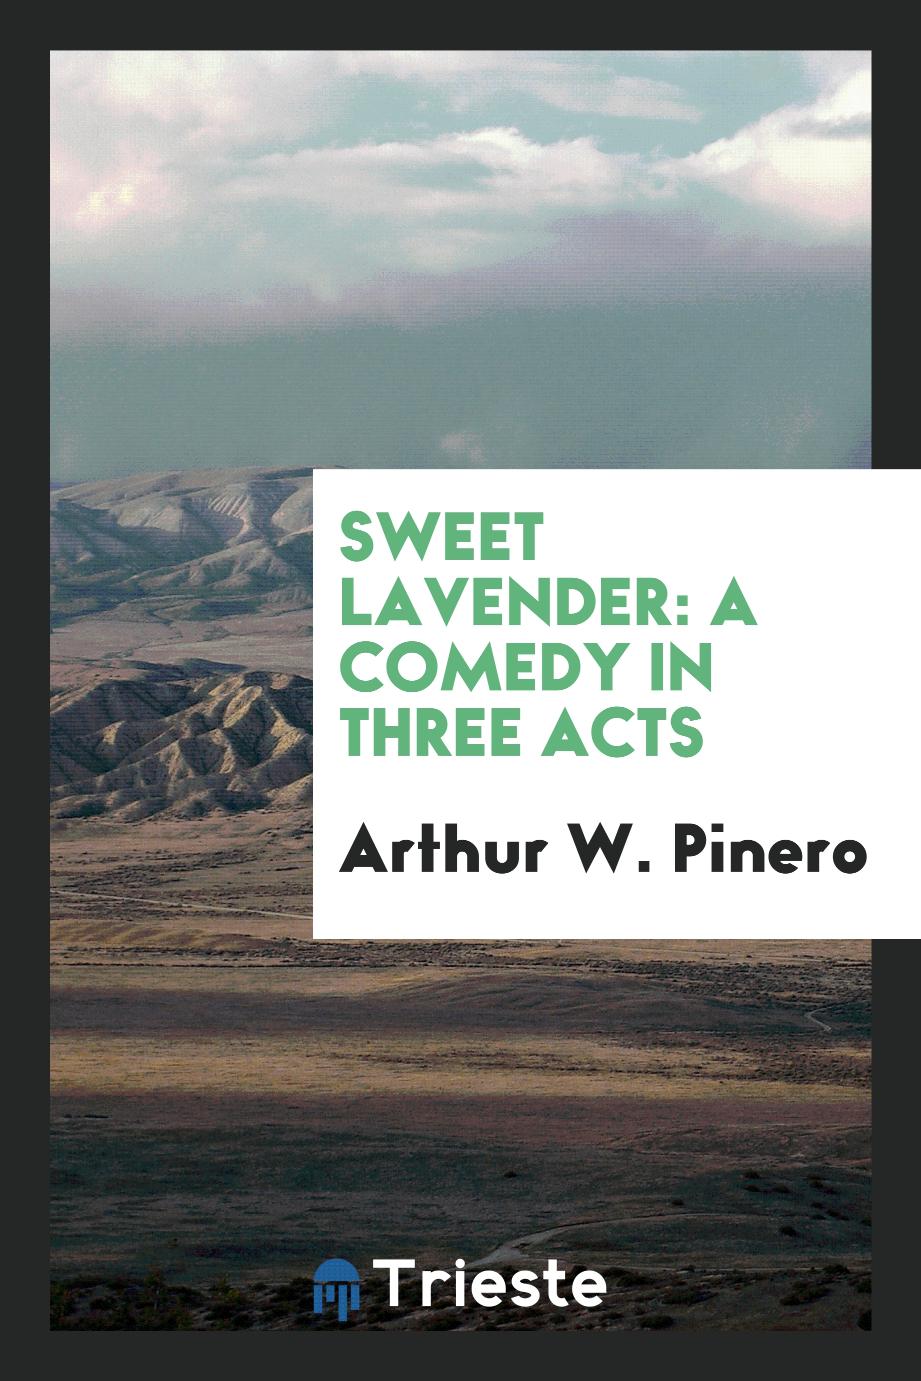 Sweet Lavender: a comedy in three acts